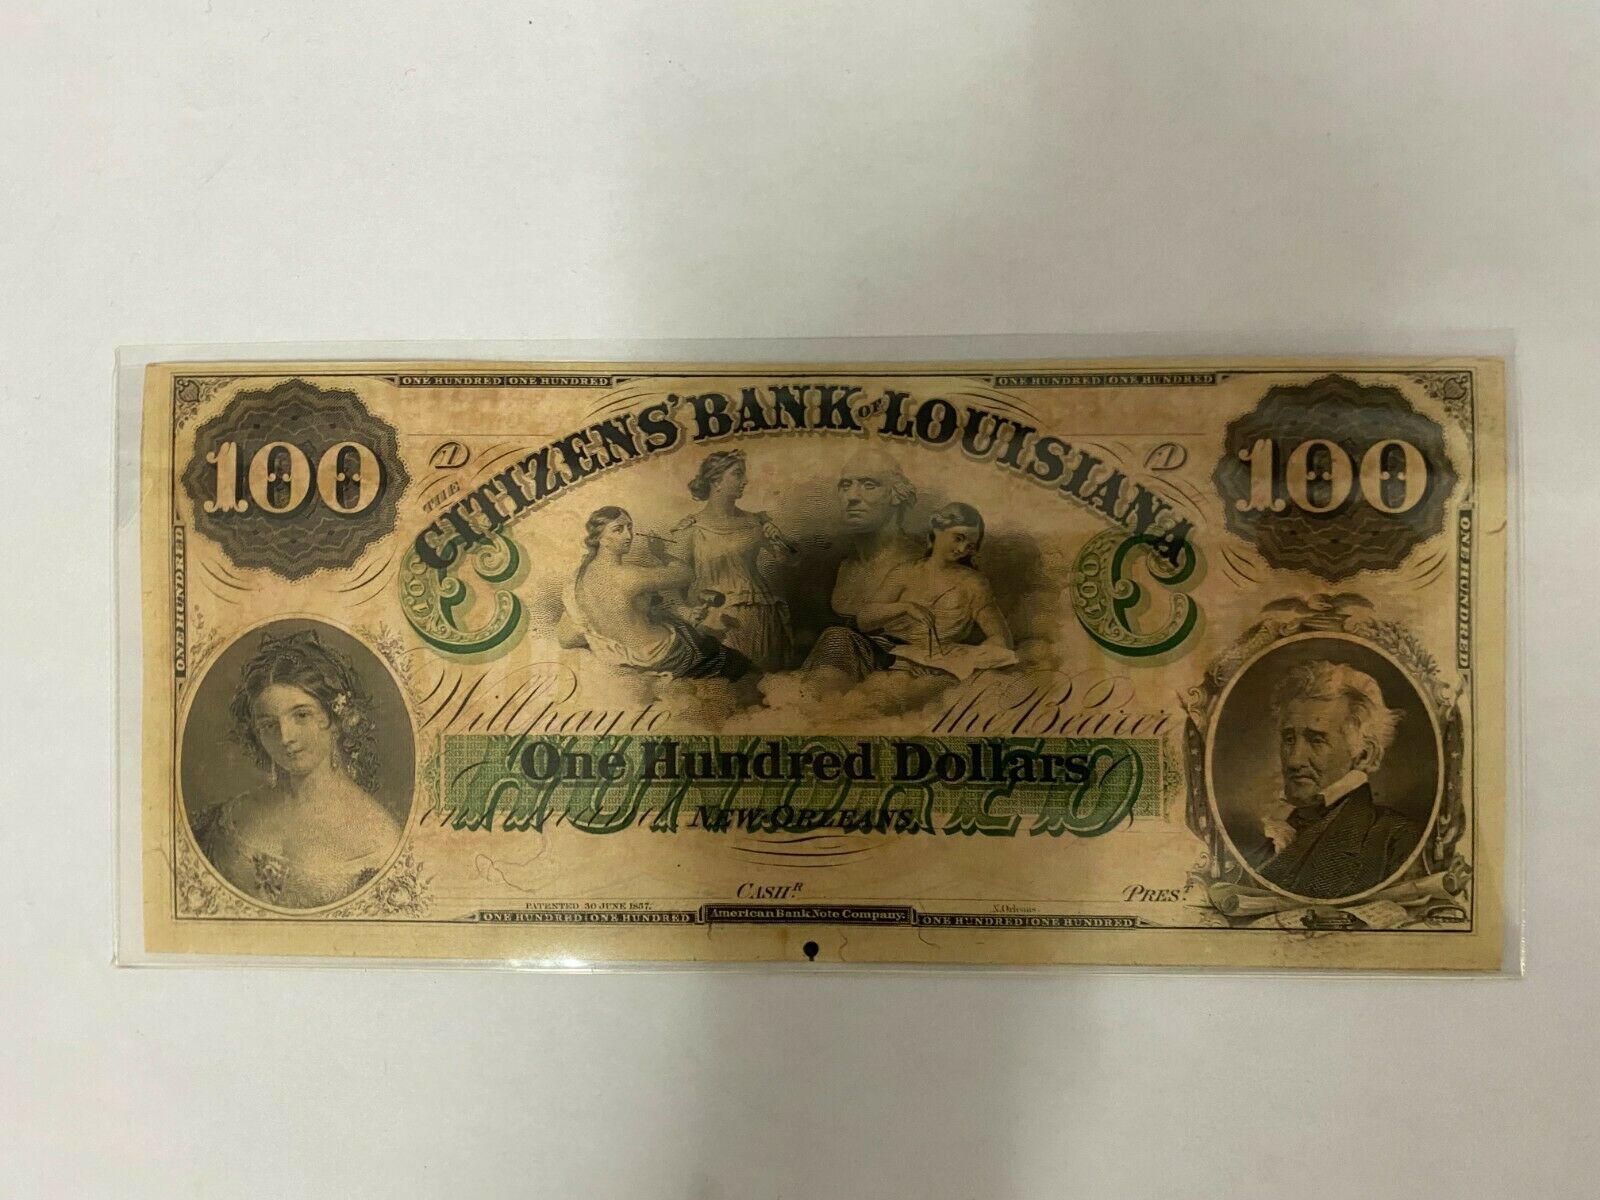 Citizens Bank Of Louisiana One Hundred Dollar ($100) Bank Note Obsolete